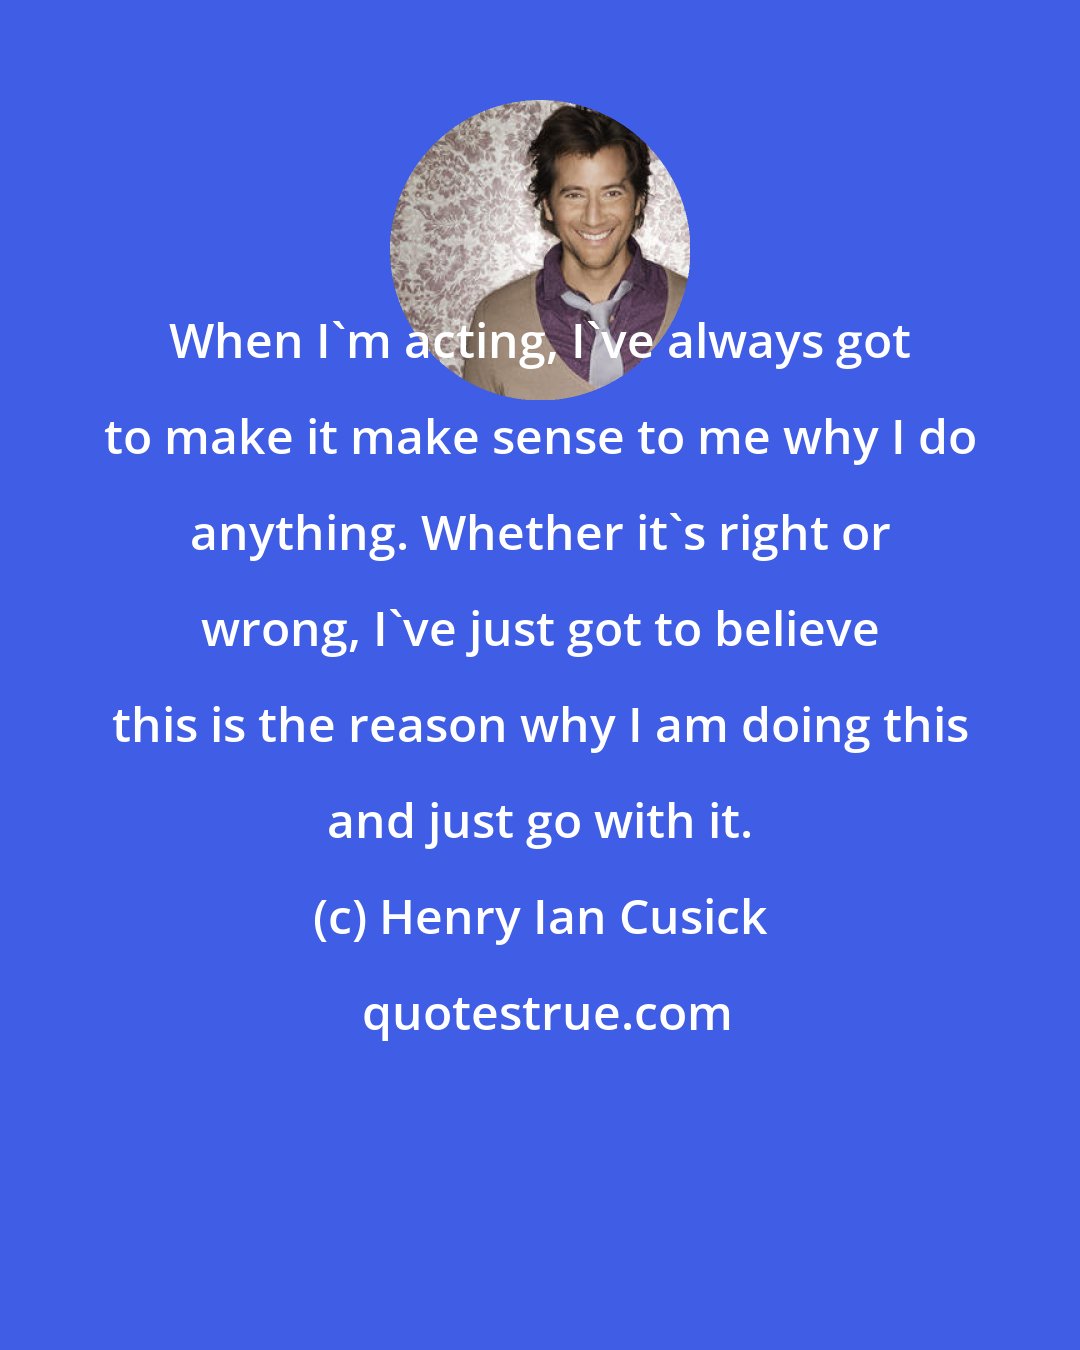 Henry Ian Cusick: When I'm acting, I've always got to make it make sense to me why I do anything. Whether it's right or wrong, I've just got to believe this is the reason why I am doing this and just go with it.